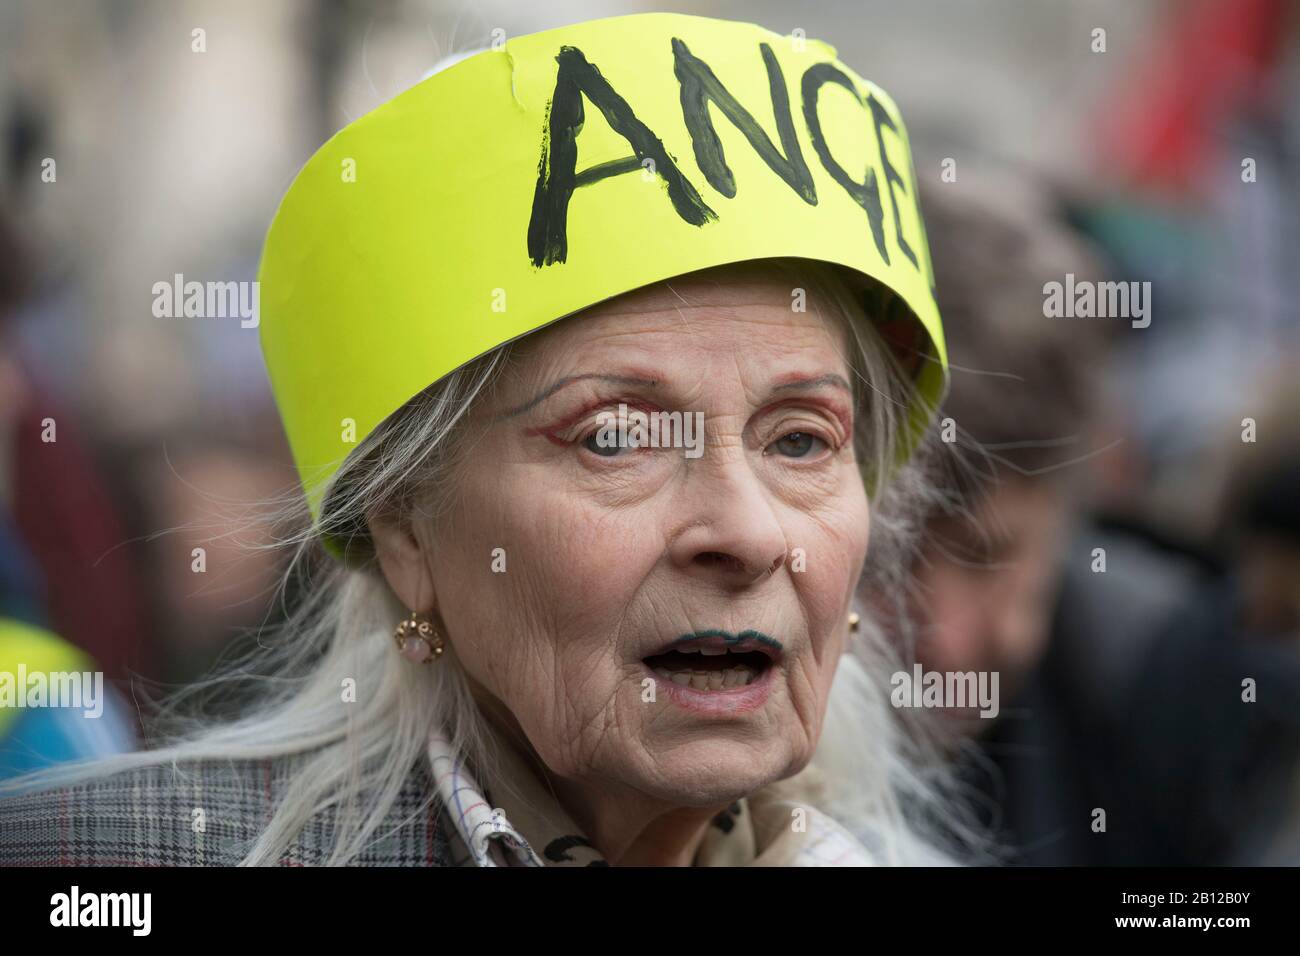 British fashion designer Vivienne Westwood attending a rally to oppose extradition to the United States of Julian Assange who is in Belmarsh prison. The march was from Australia House to Parliament Square in London, UK Stock Photo